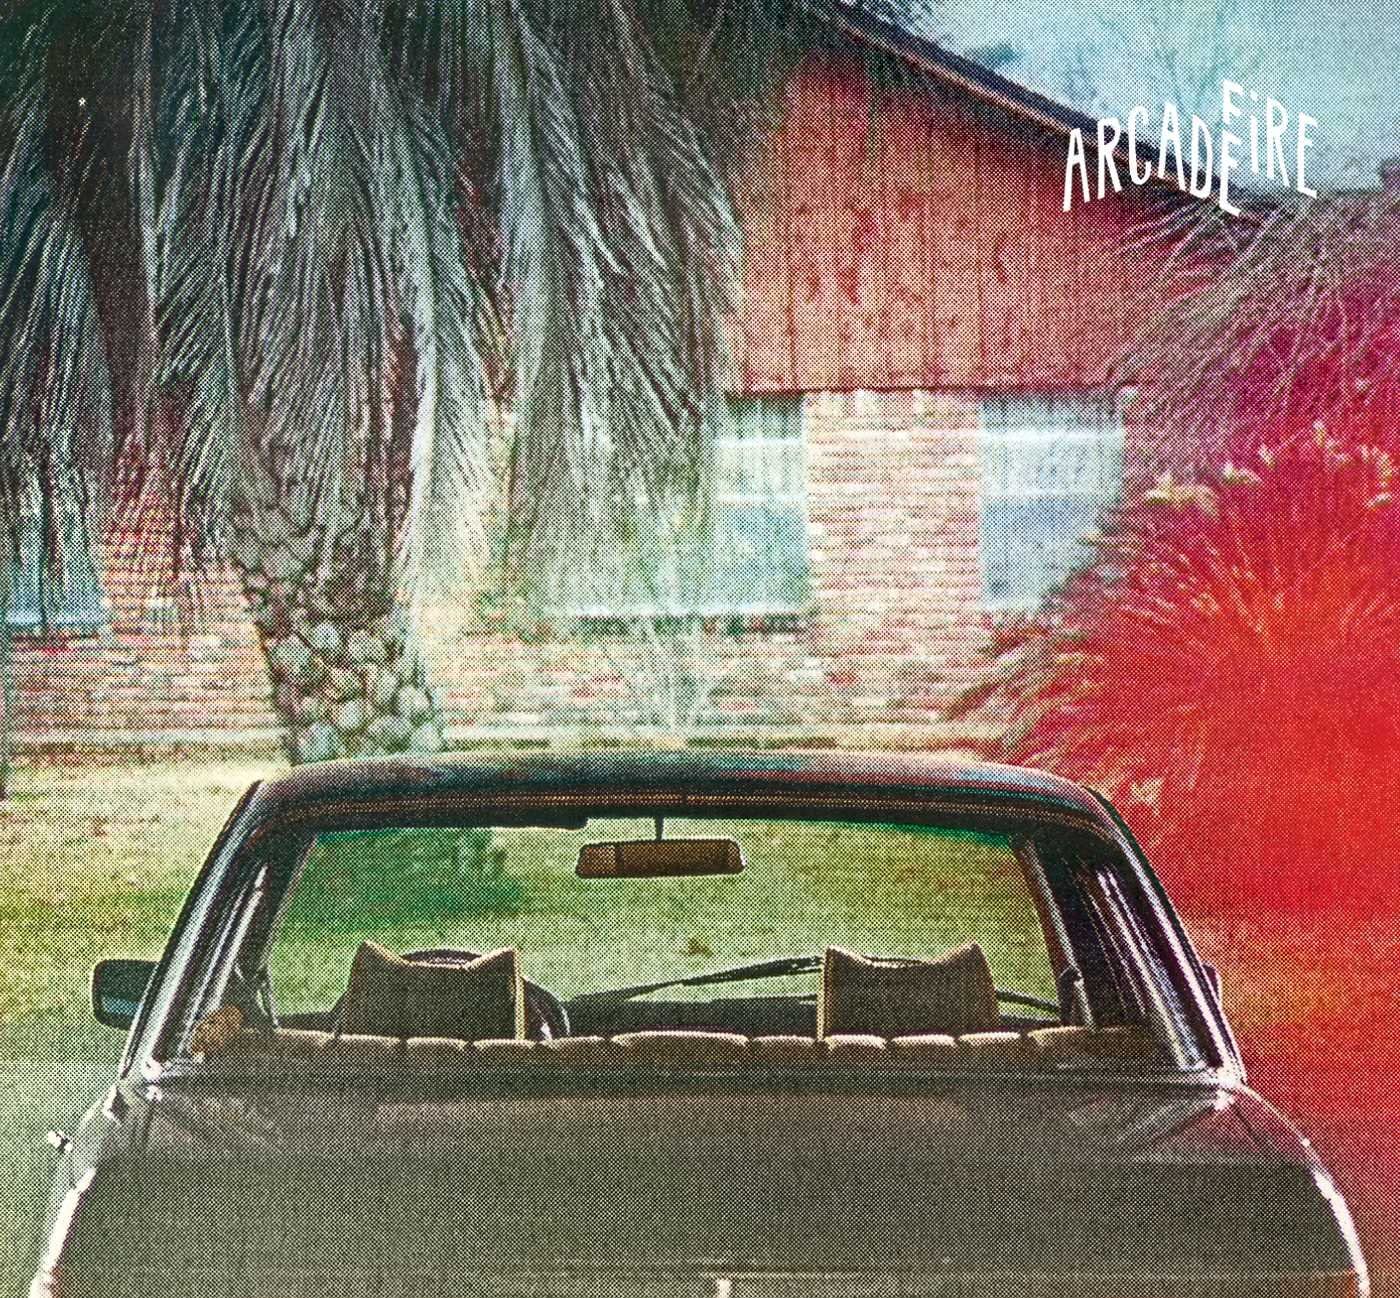 Arcade Fire Wasted Hours cover artwork